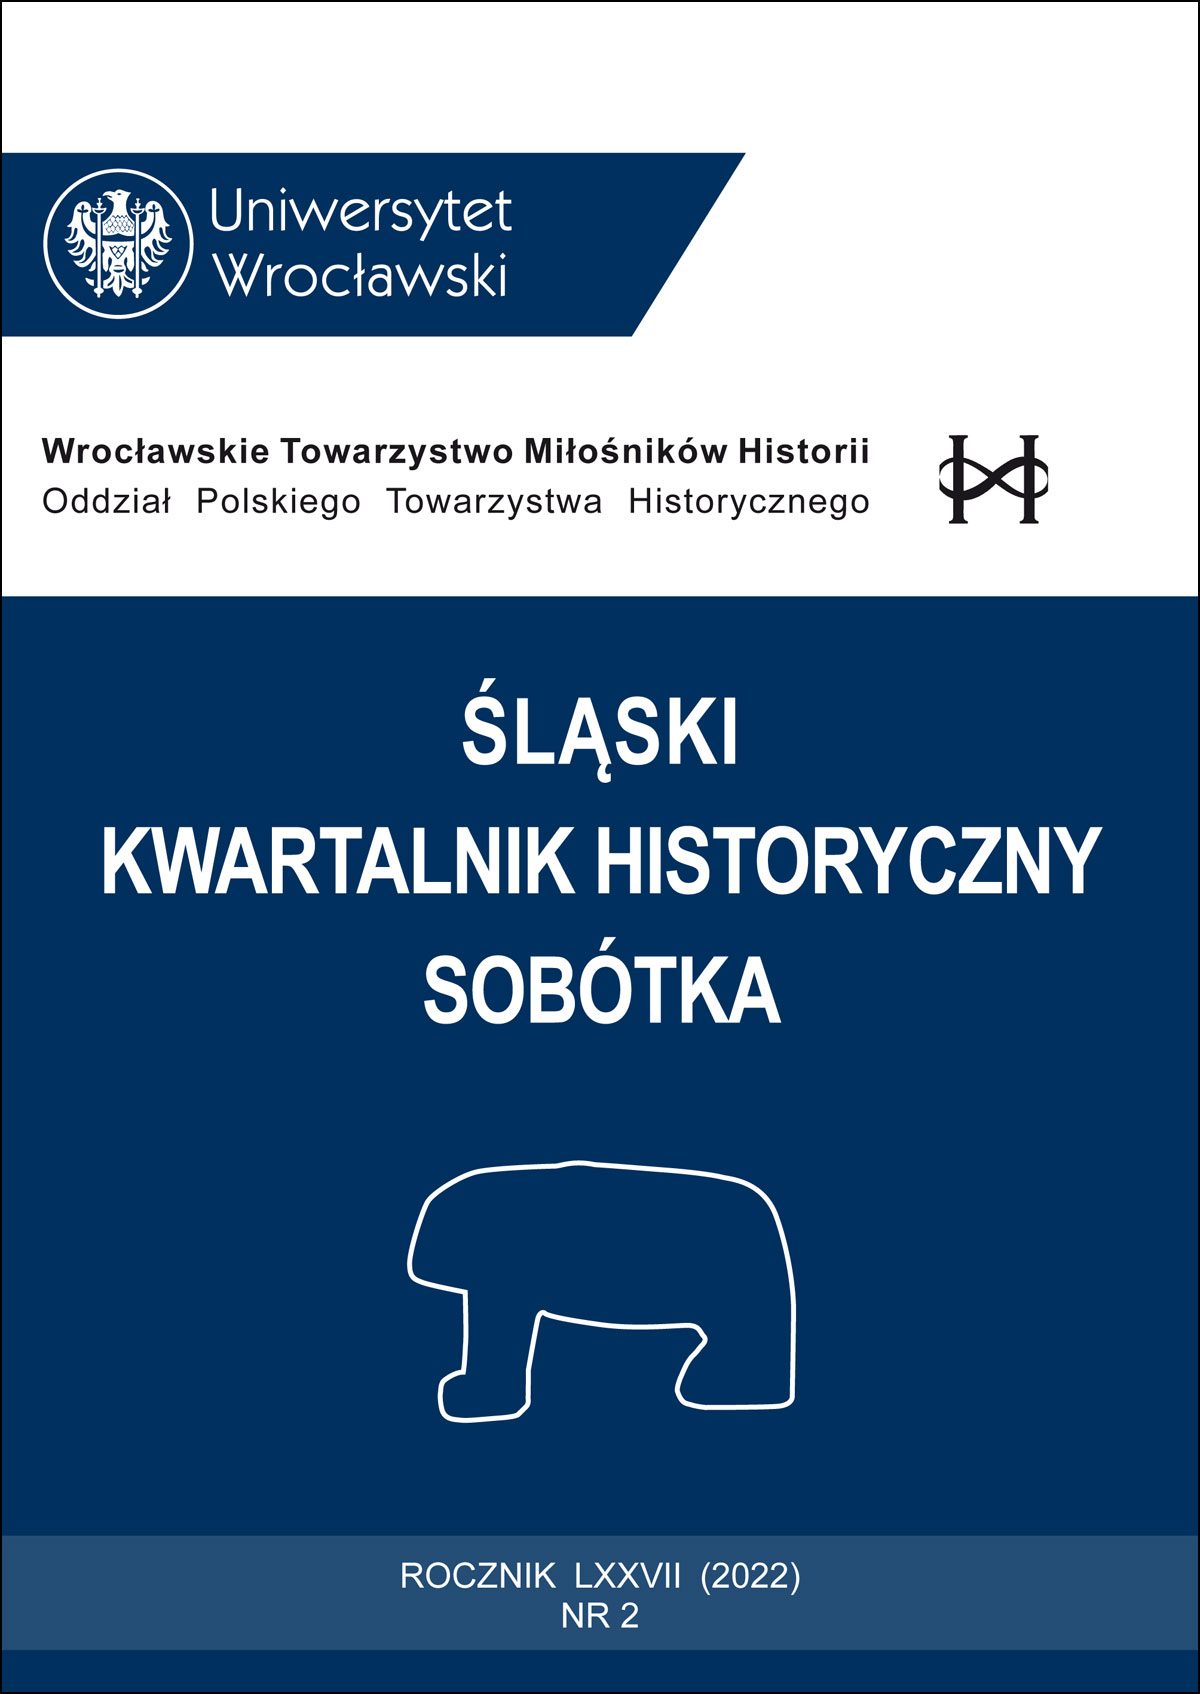 Articles of the Lwów Confederation of the Crown Army from 1622 Cover Image